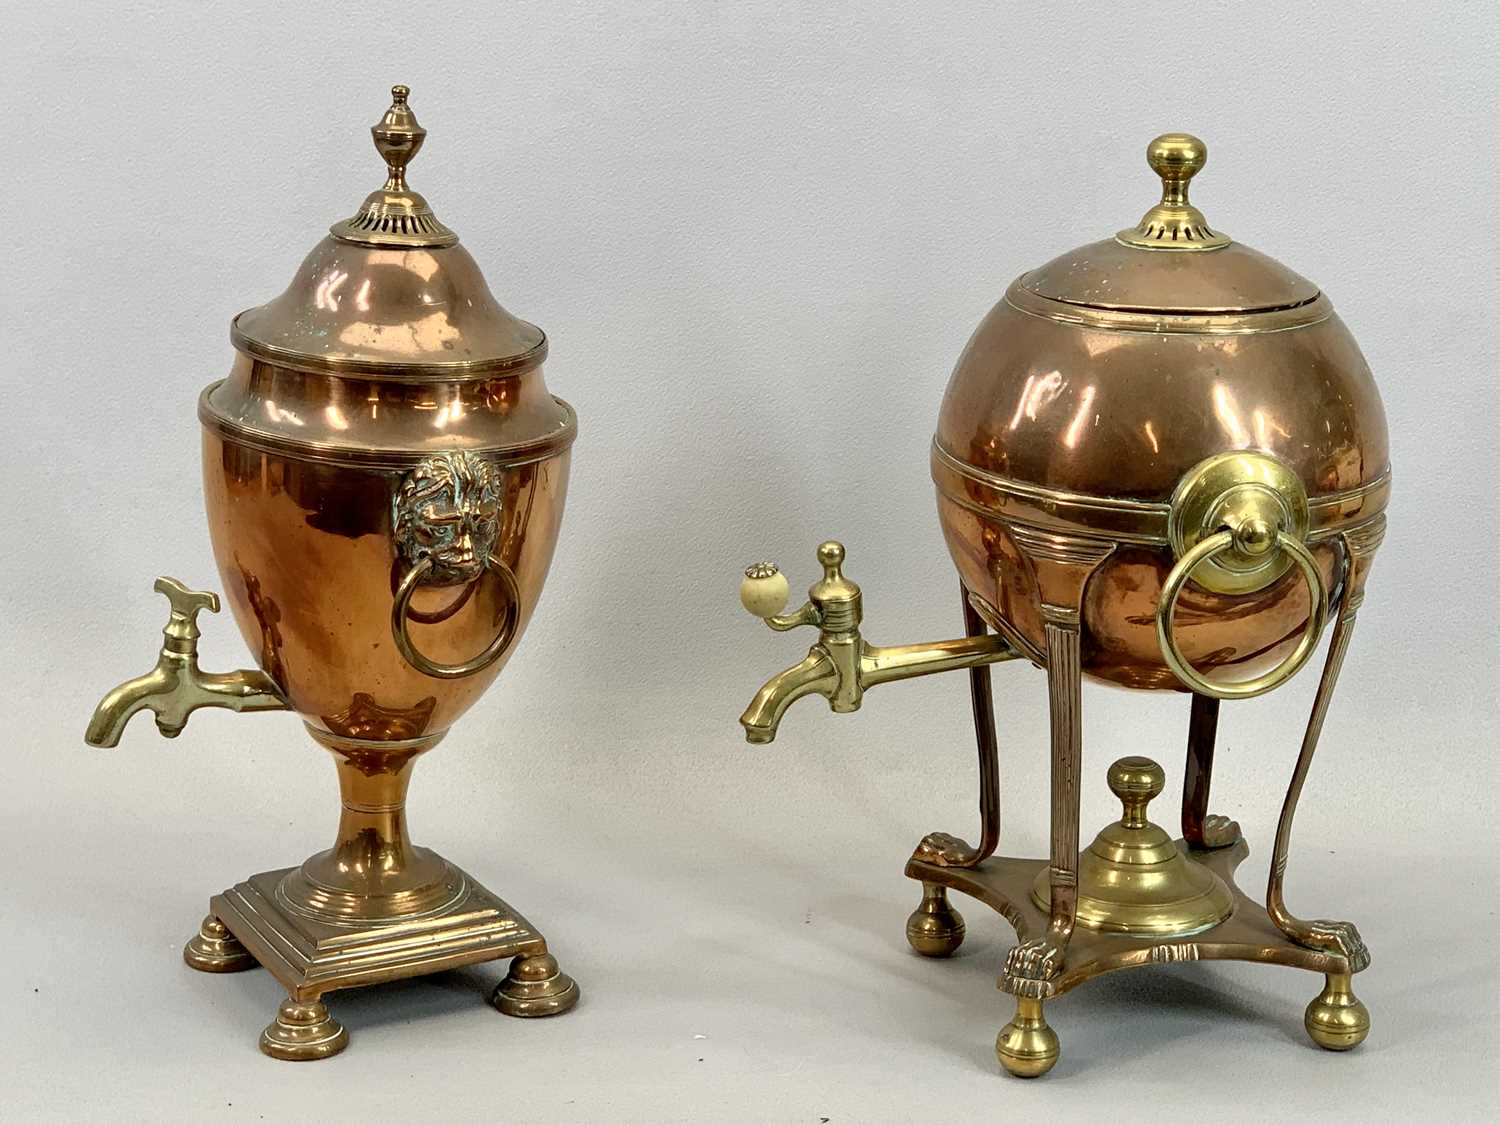 REGENCY COPPER SAMOVAR - spherical body with brass ring side handles, tap and finial, open stand - Image 2 of 2